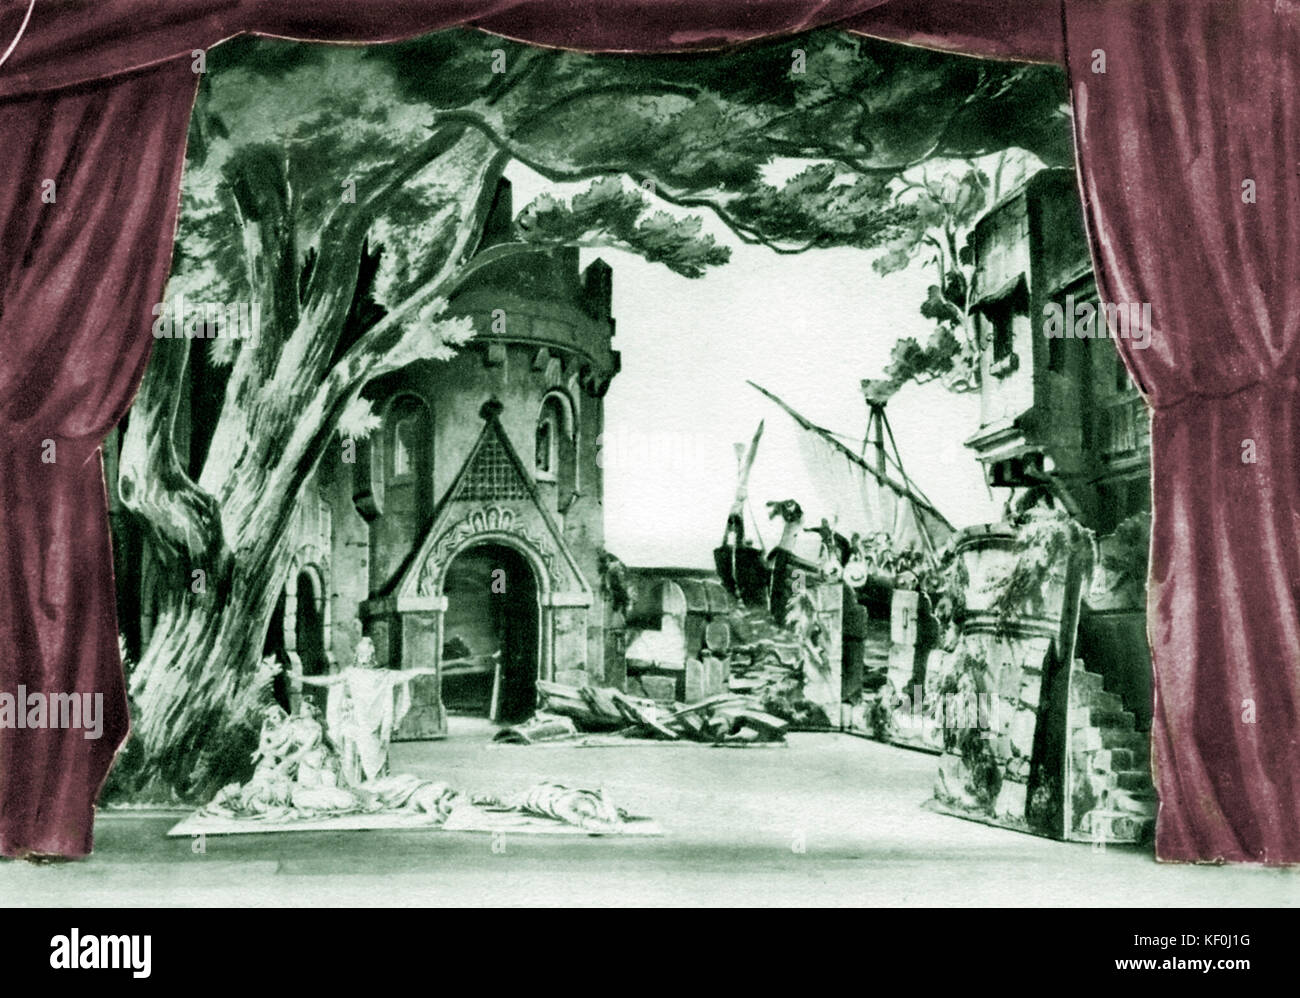 Richard Wagner 's Tristan und Isolde. Set design by Angelo Quaglio for the world premiere of the opera at the Münich Opera. RW: German composer & author, 22 May 1813 - 13 February 1883. AQ: Italian architect and designer, 1784-1815. Tinted version. Stock Photo